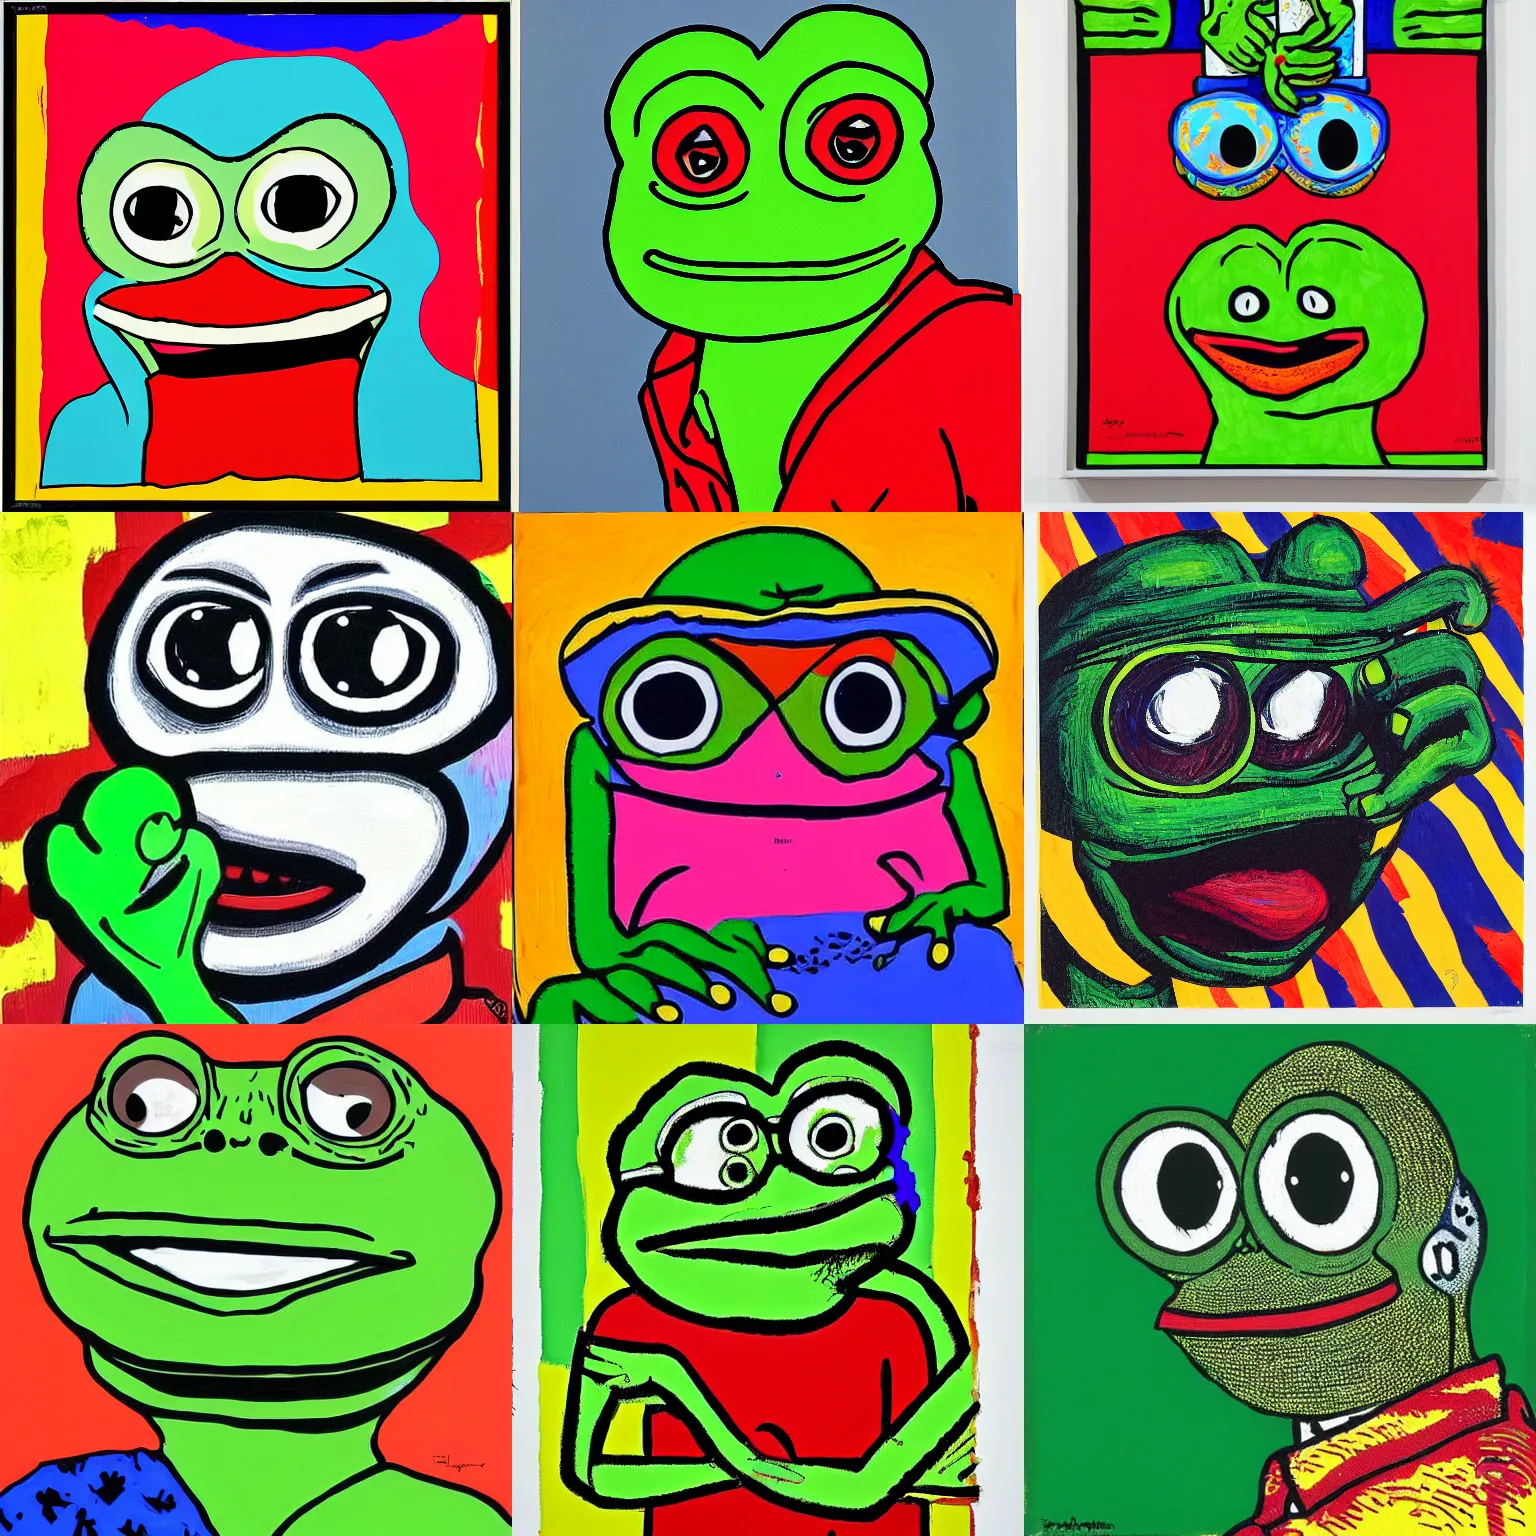 Prompt: pepe the frog,pop art masterpiece painting by Jasper Johns and Matt Furie,